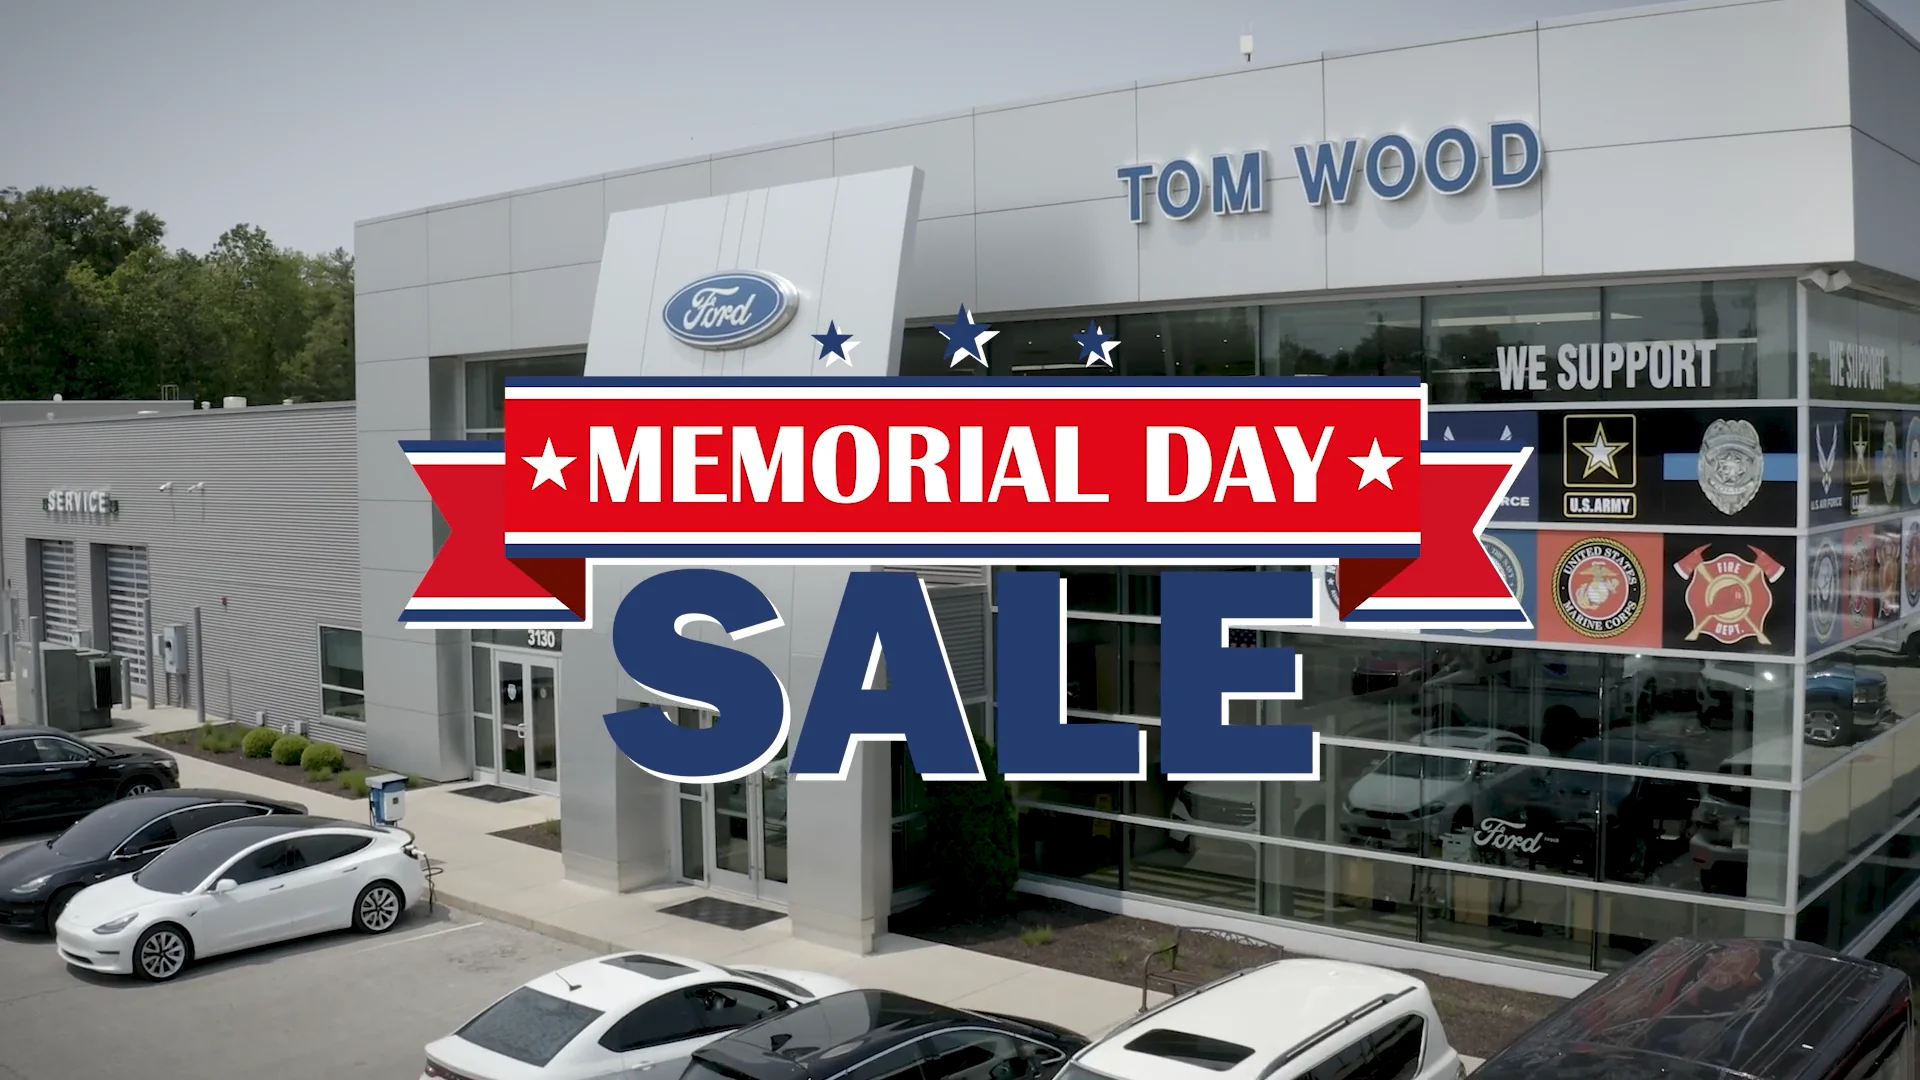 Tom Wood Ford Memorial Day Sale MAY 2023 on Vimeo